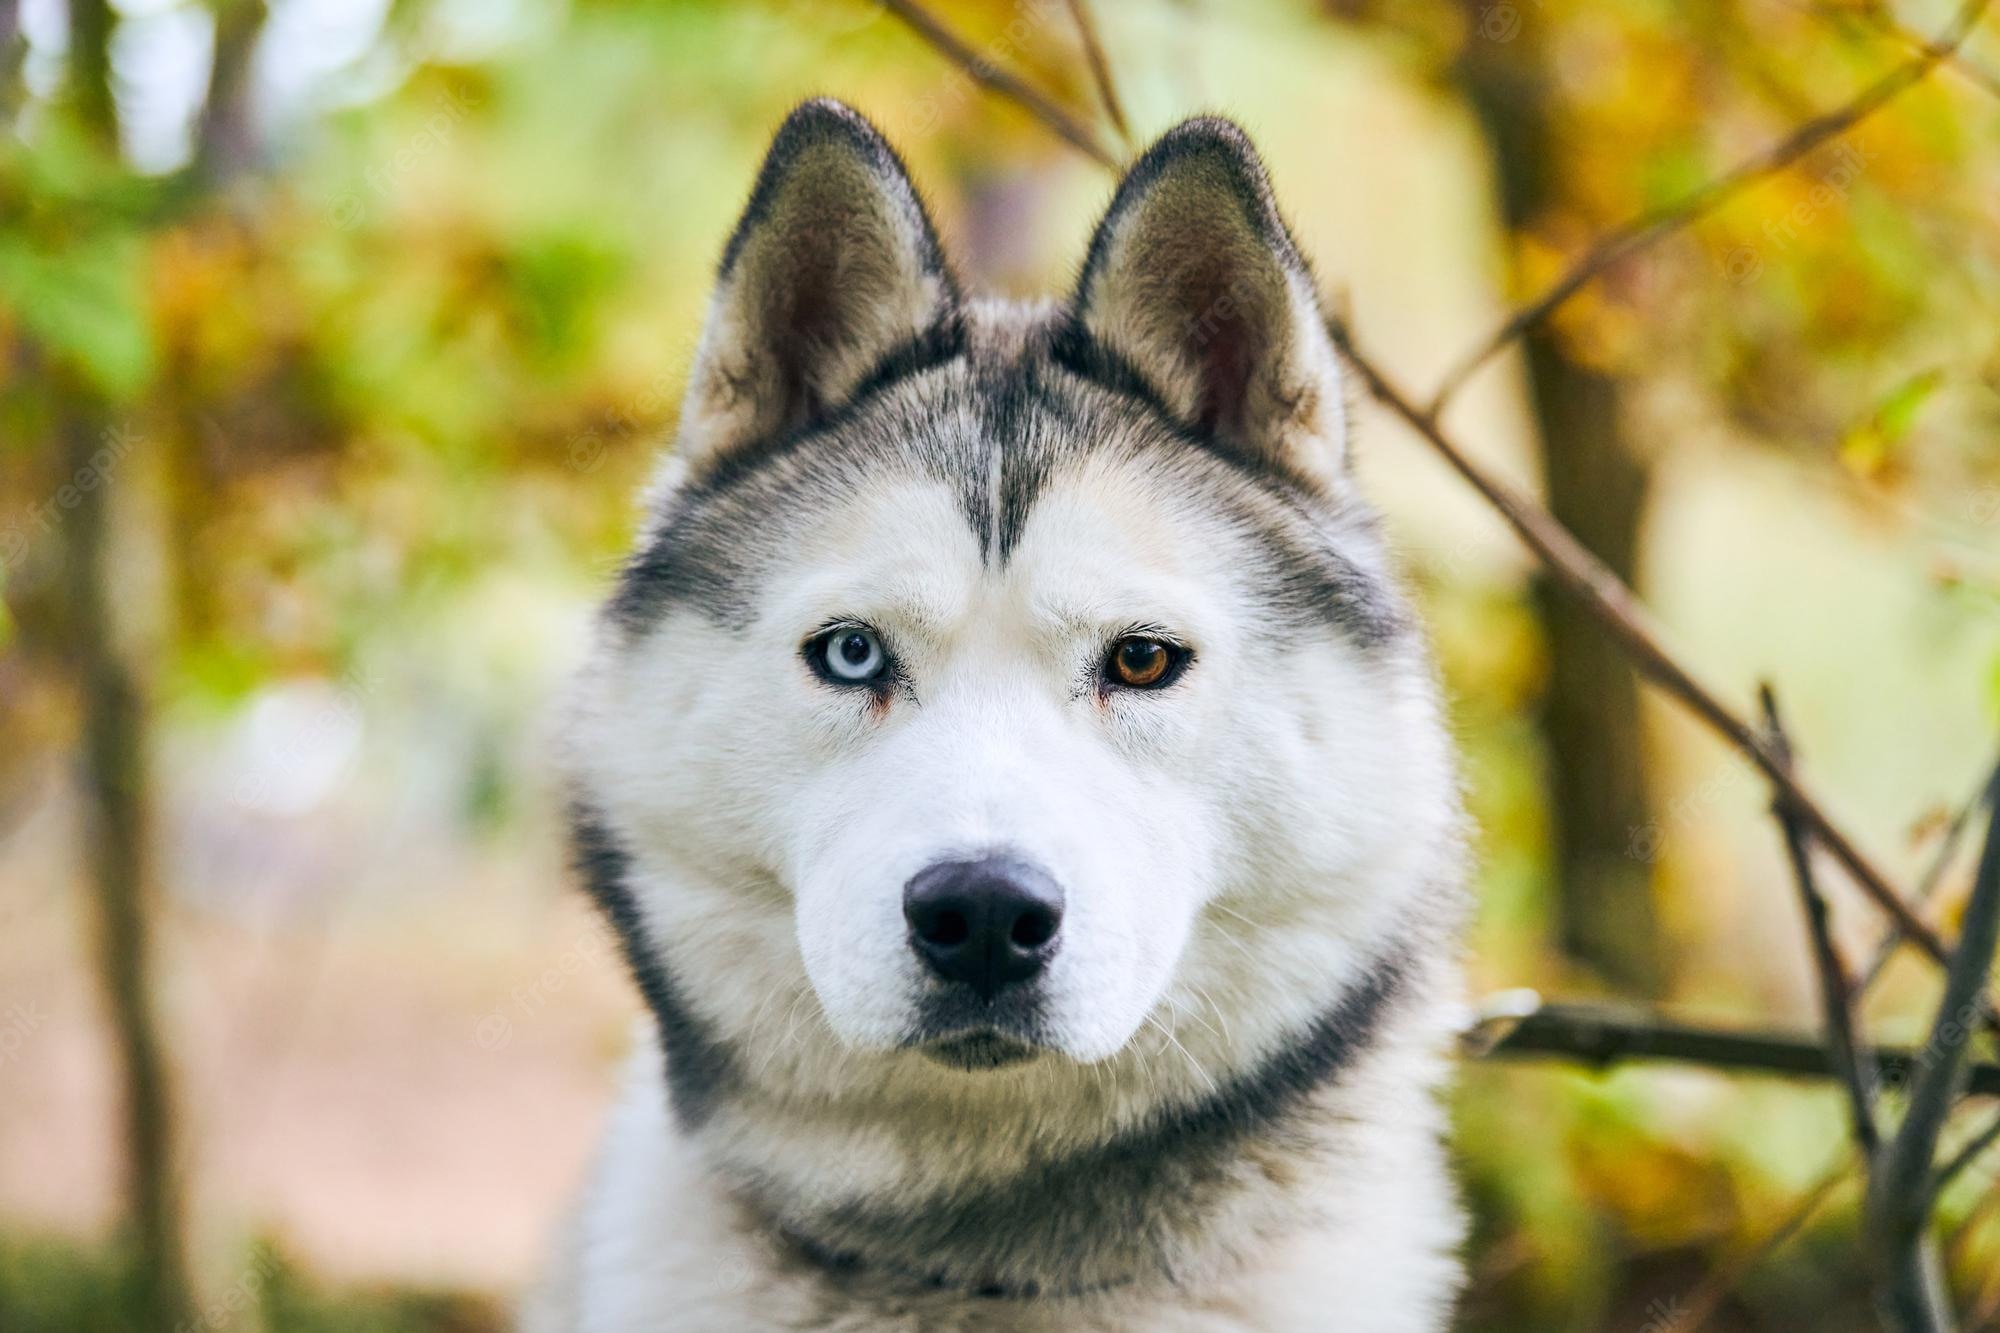 Premium Photo. Purebred siberian husky portrait close up, siberian husky face with white and black coat color and different eyes, sled dog breed. husky dog muzzle outdoor for design, blurred forest